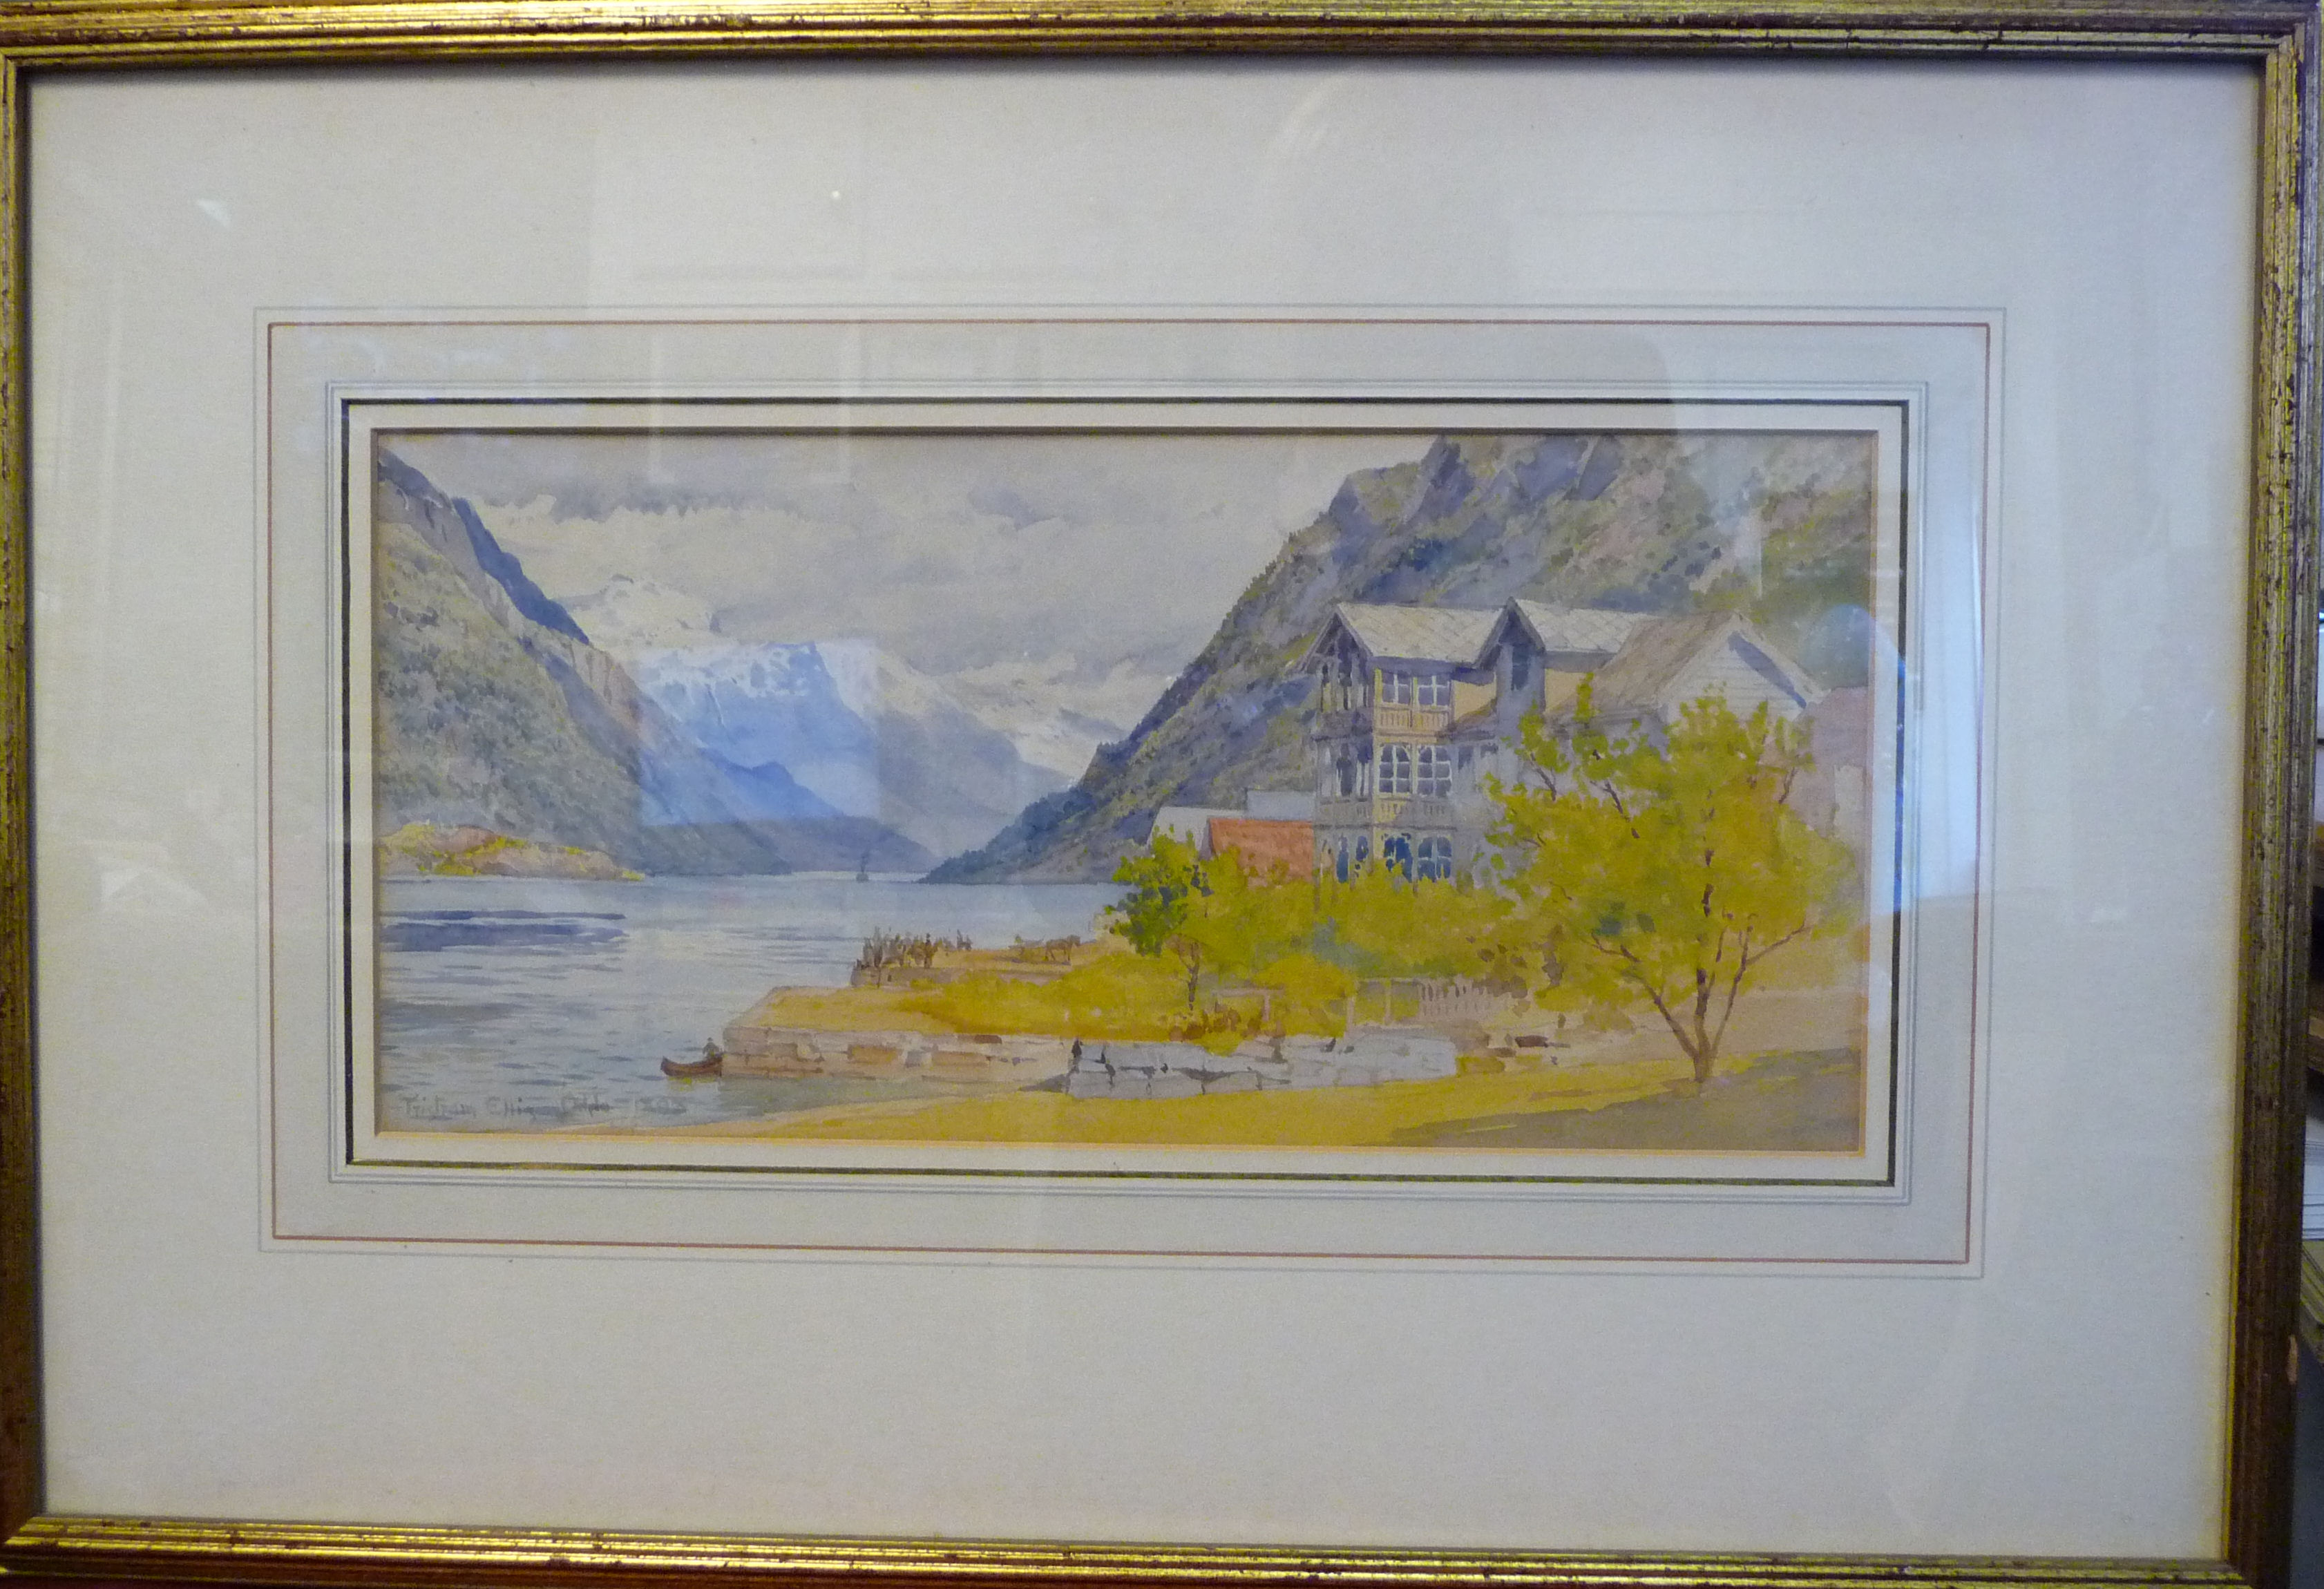 Tristram Ellis - 'Village on a fjord' watercolour bears a signature & dated 1898 6. - Image 3 of 8